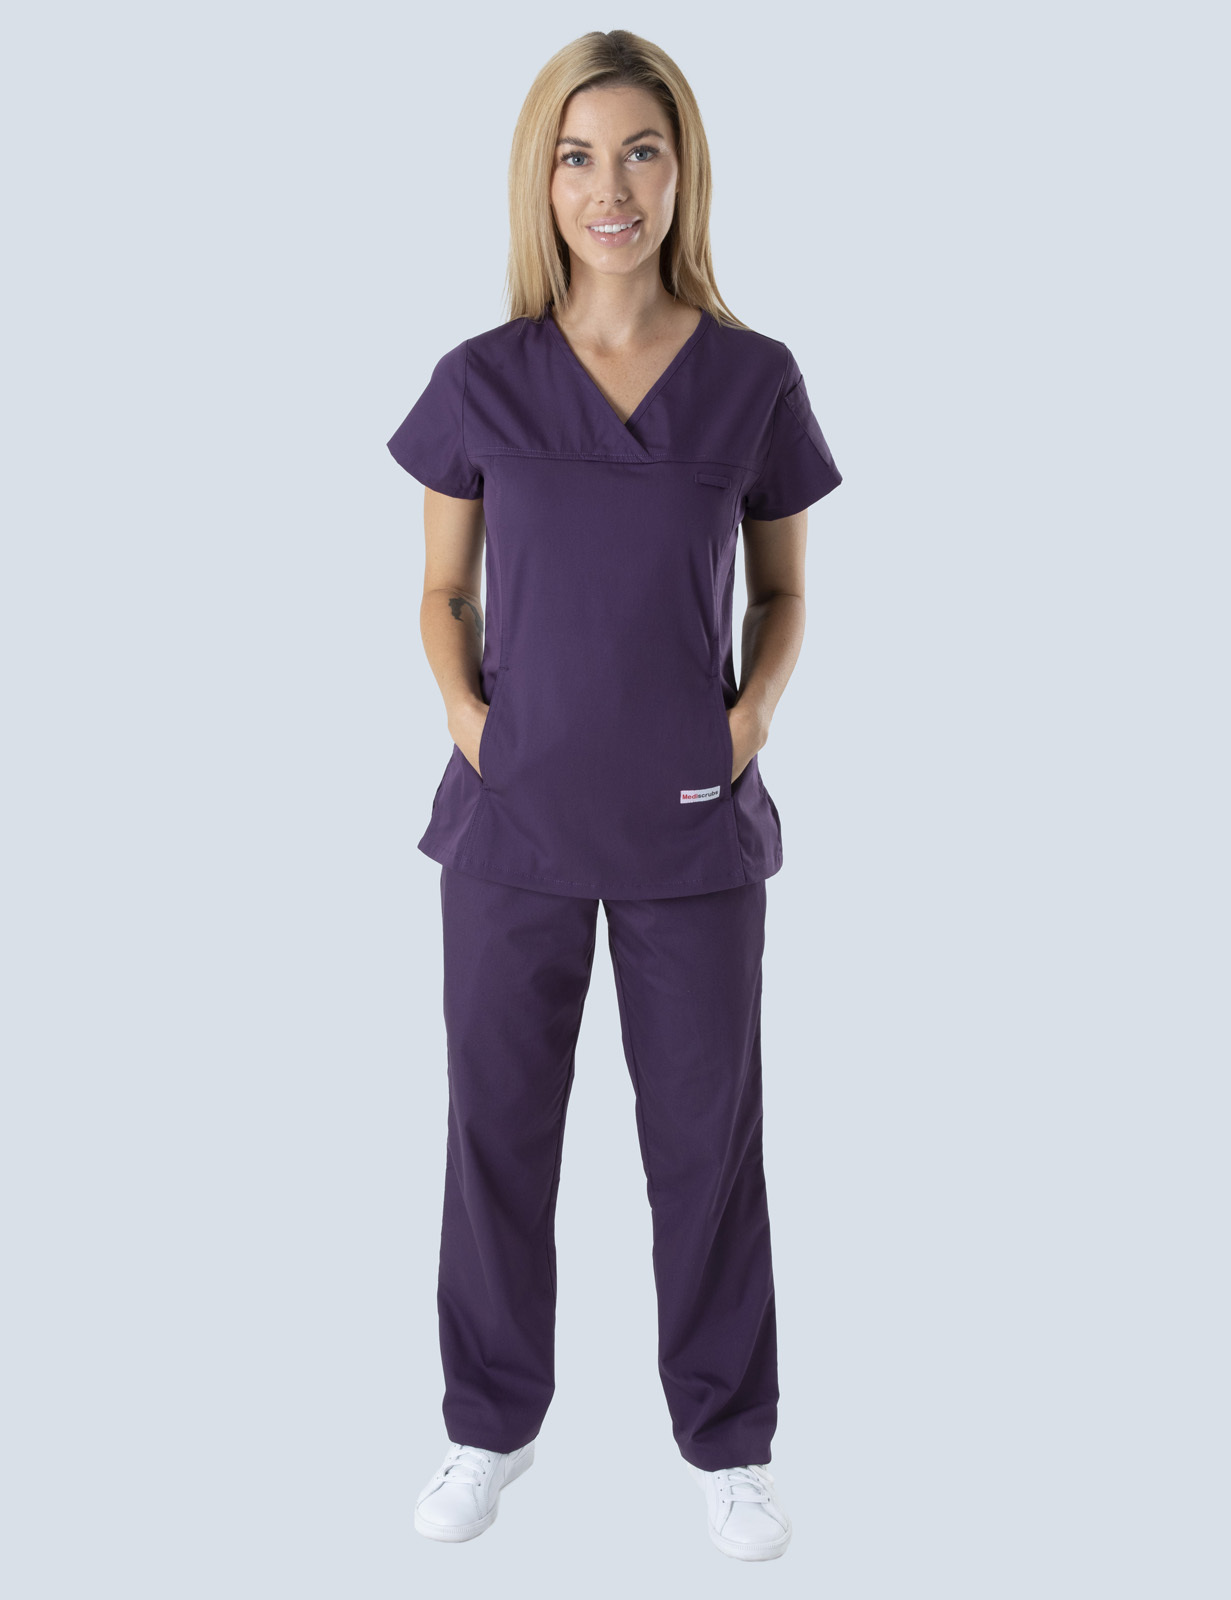 Gympie Hospital - Midwife (Women's Fit Solid Scrub Top and Cargo Pants in Aubergine incl Logos)